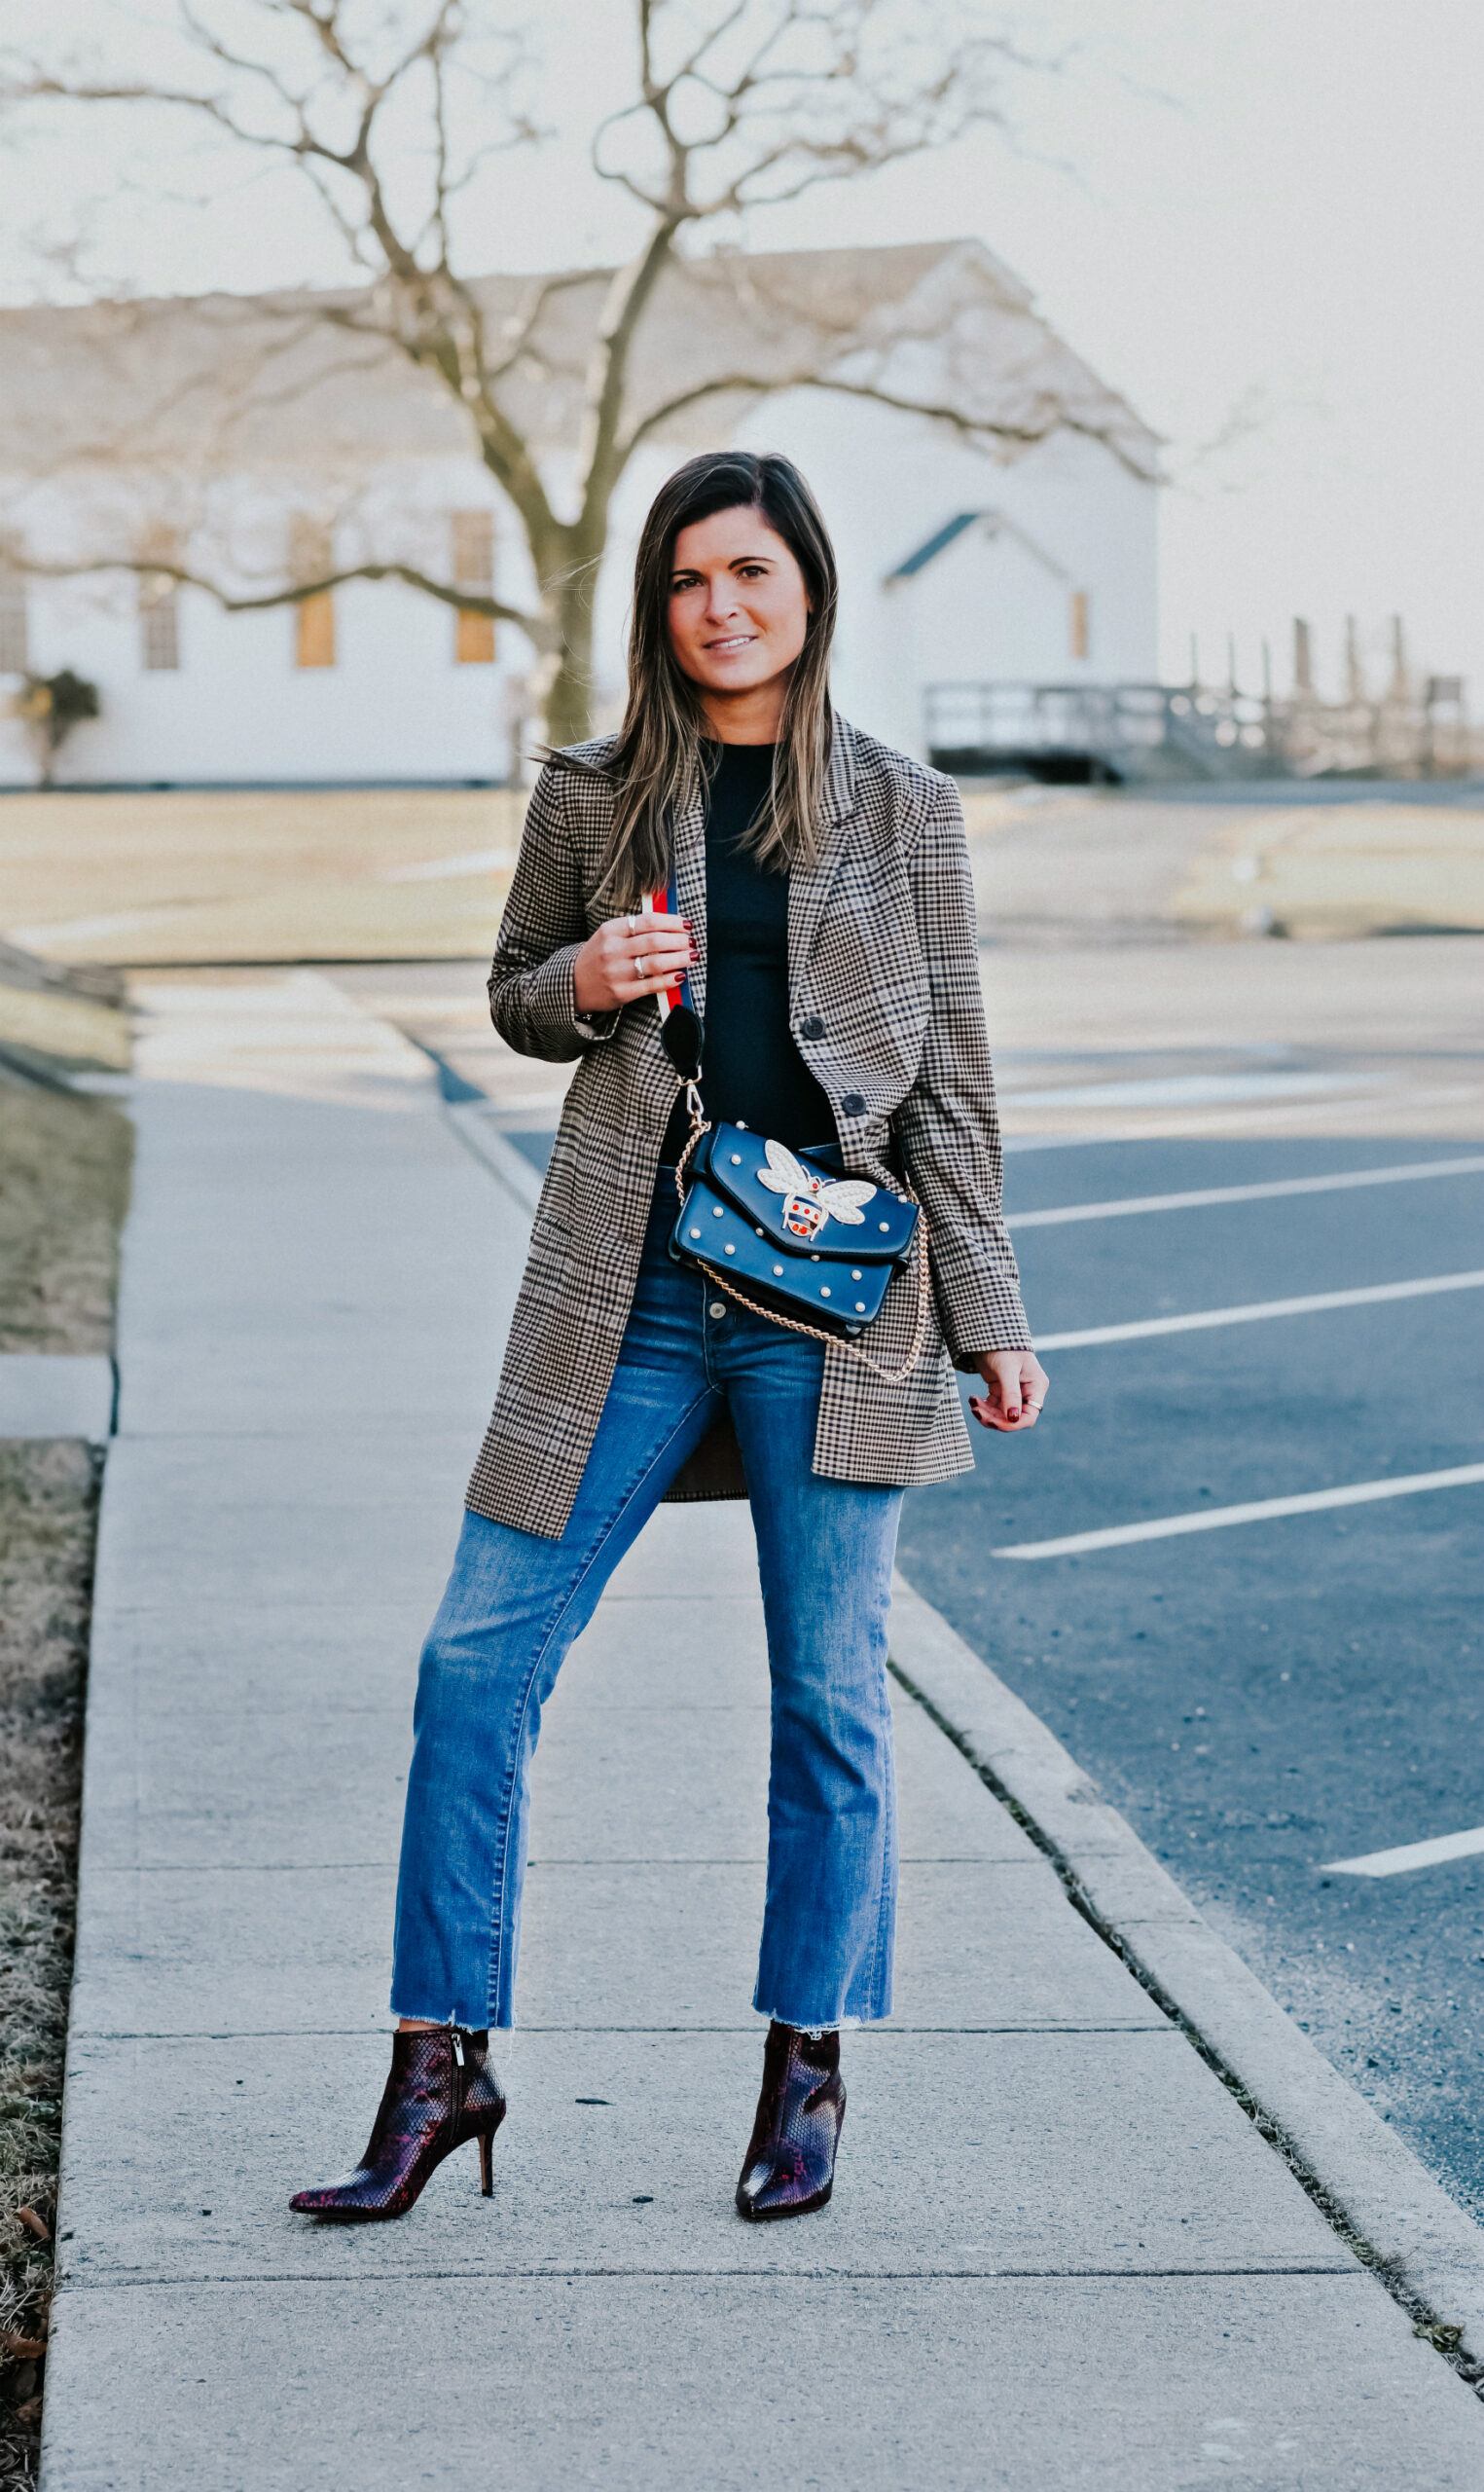 Plaid Blazer & Jeans Outfit, Fall Winter Style, Cropped American Eagle Jeans, Red Snakeskin Booties, Bee Crossbody Bag, SKIMS Essential Bodysuit, SKIMS Long Sleeve Crew Neck Thong Bodysuit in Onyx, Tilden of To Be Bright